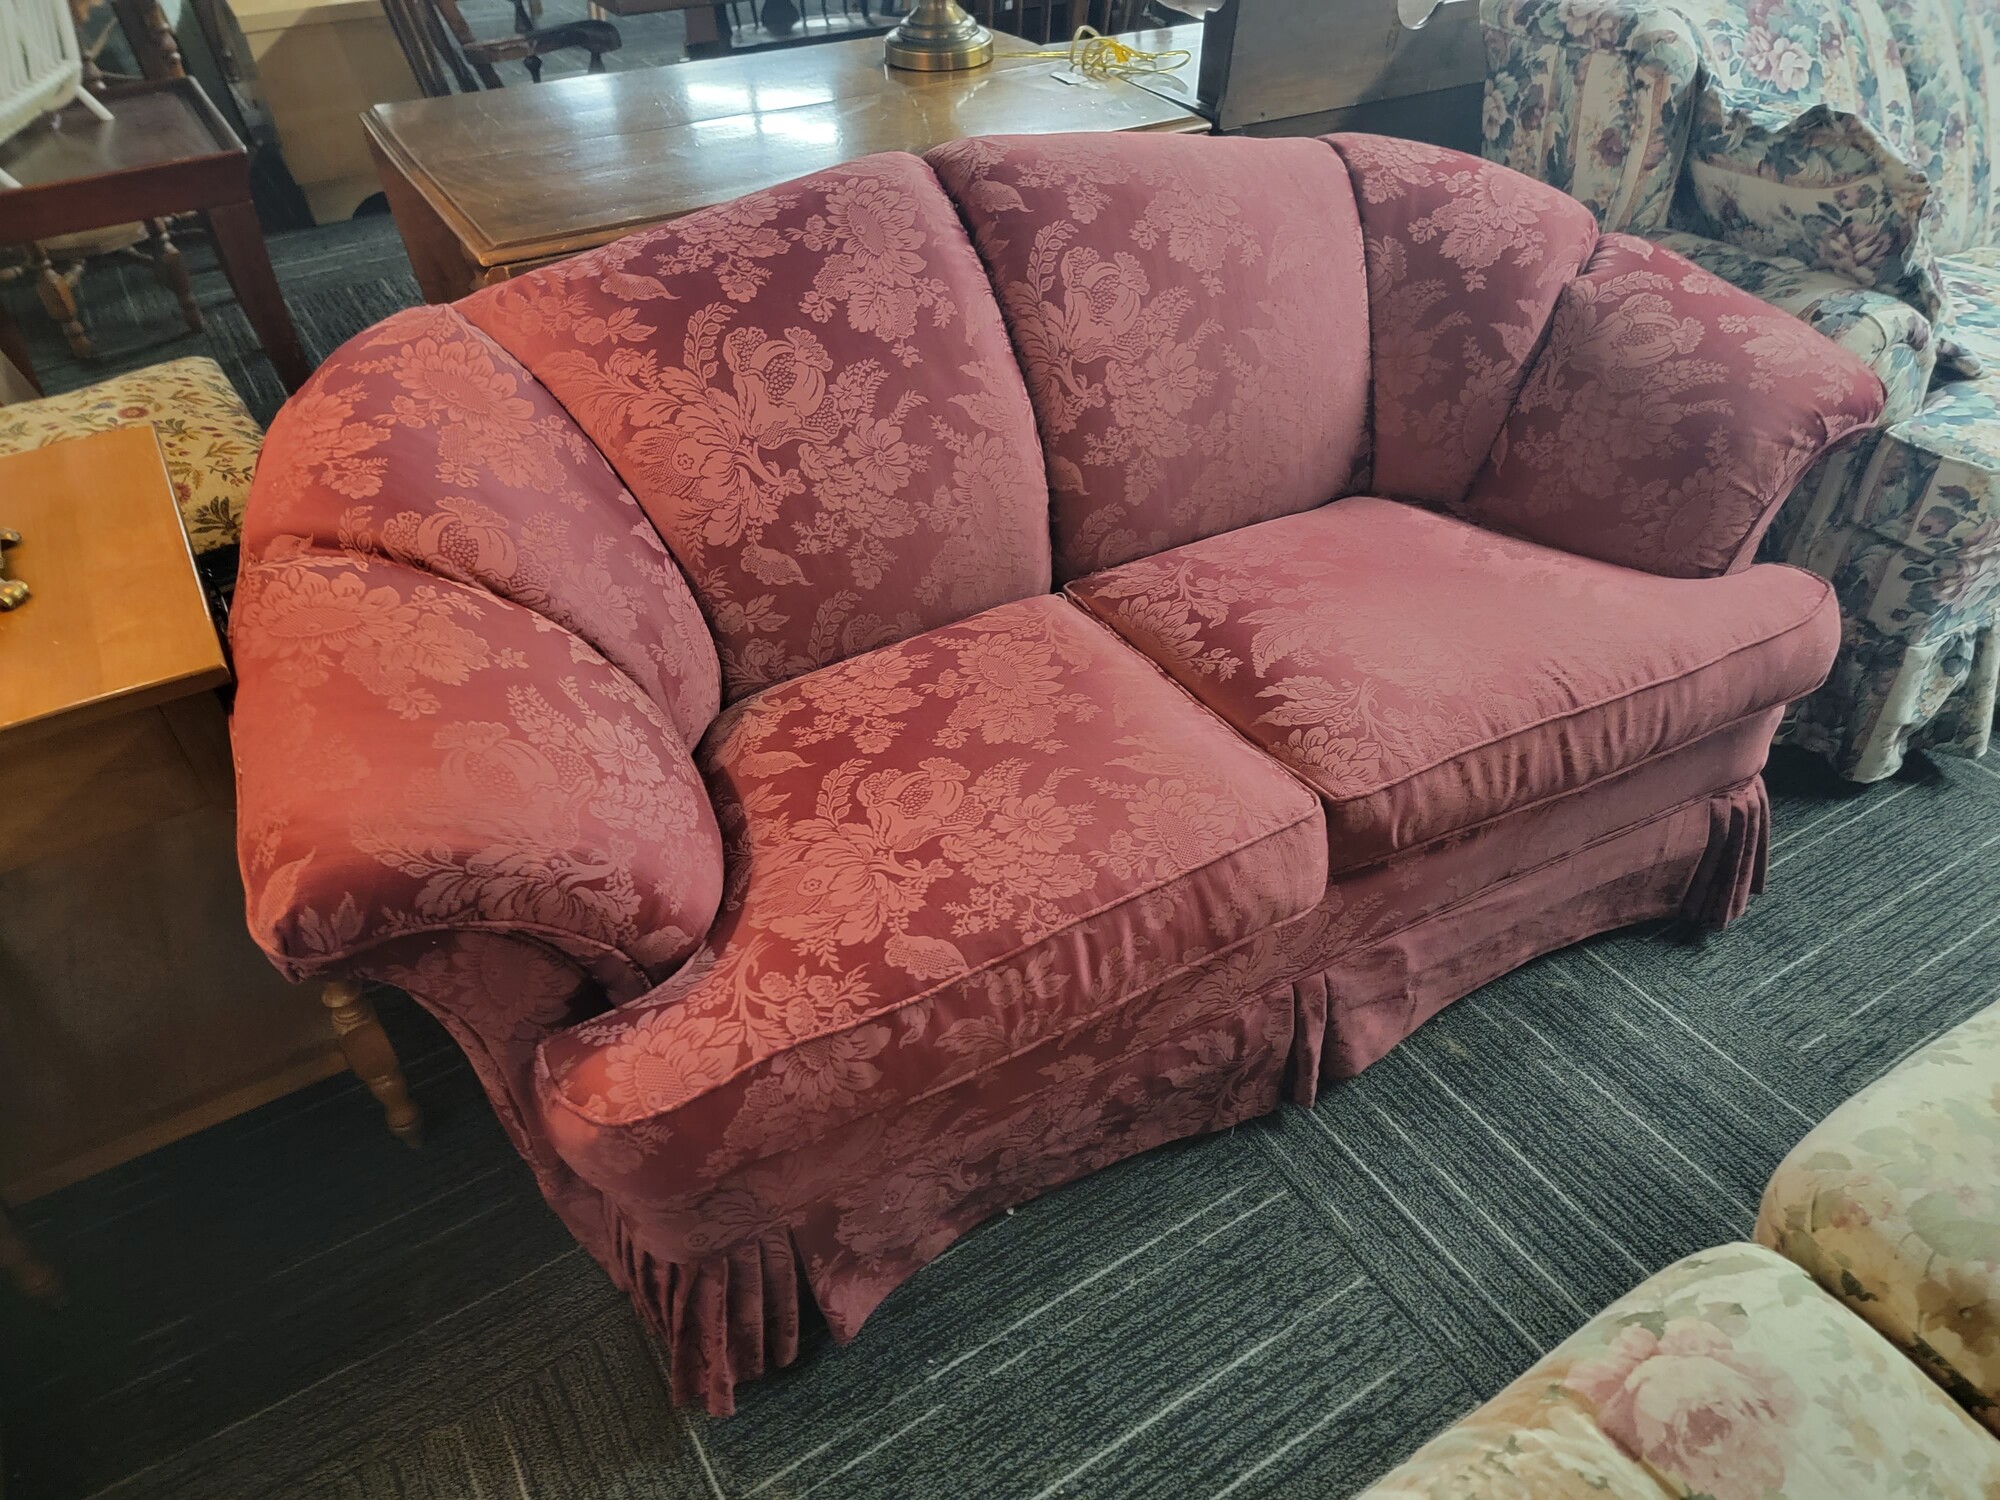 Red Loveseat by Craftmaster in good condition.